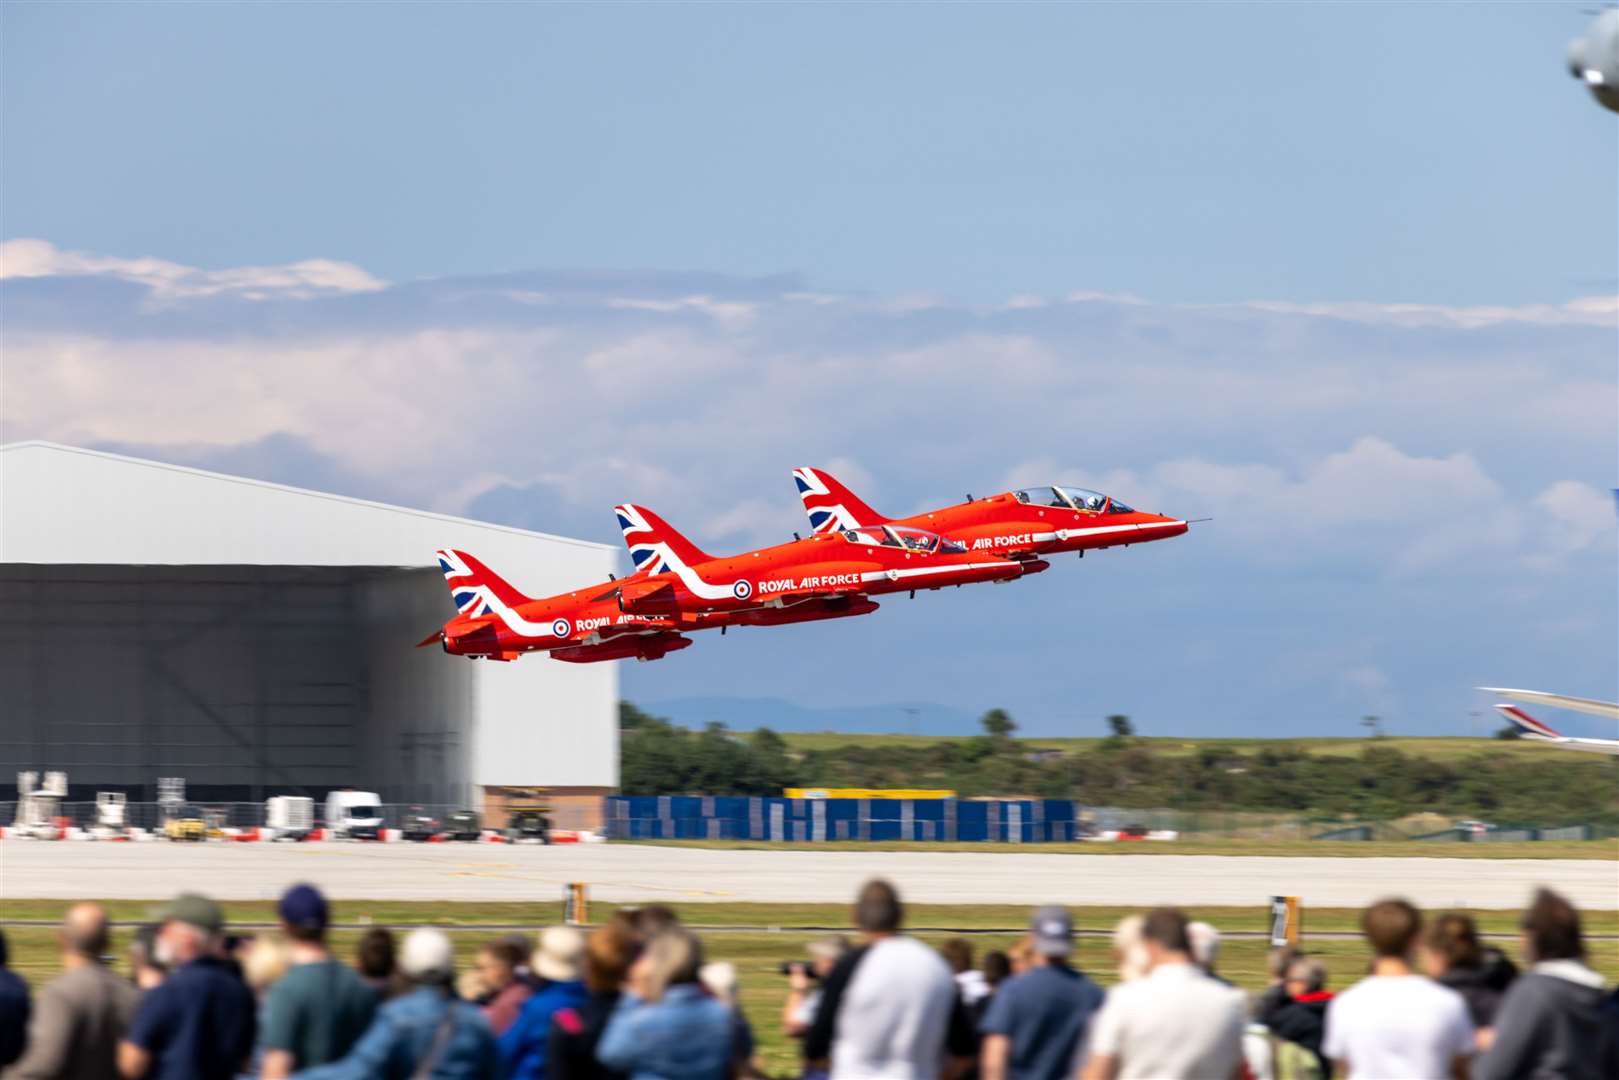 The famous Red Arrows display team.